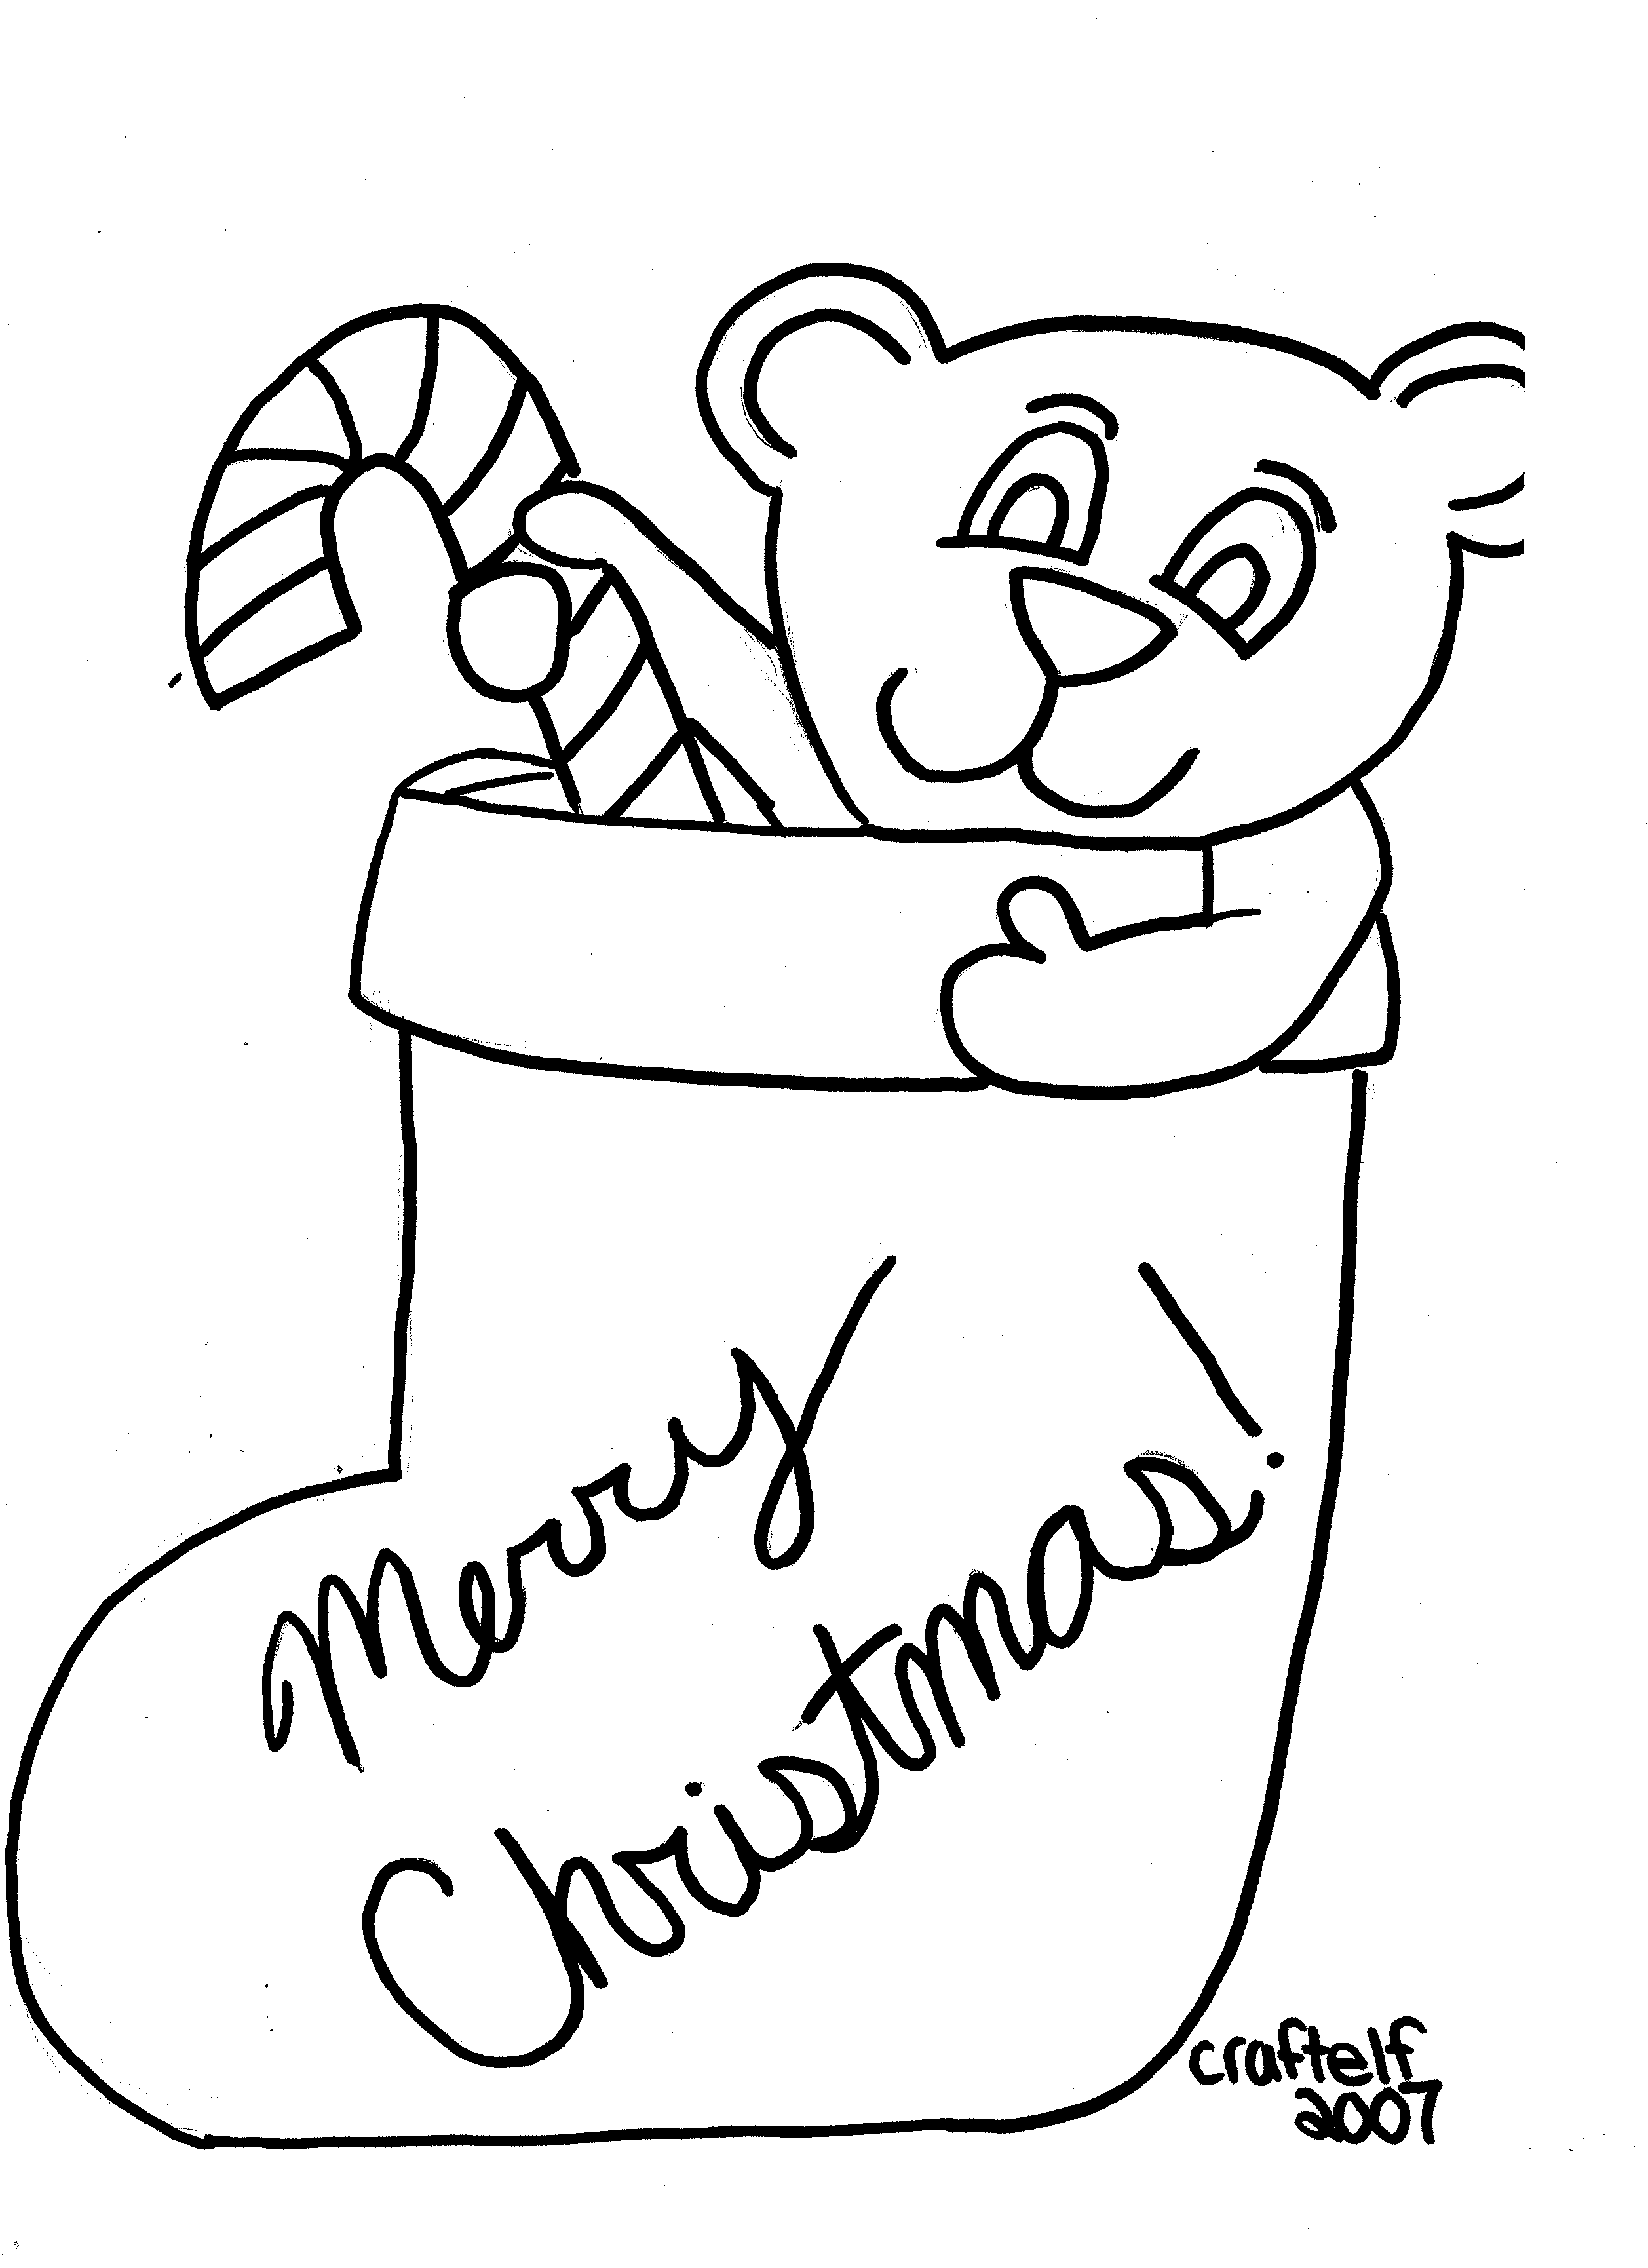 free coloring page - Christmas stocking with teddy bear